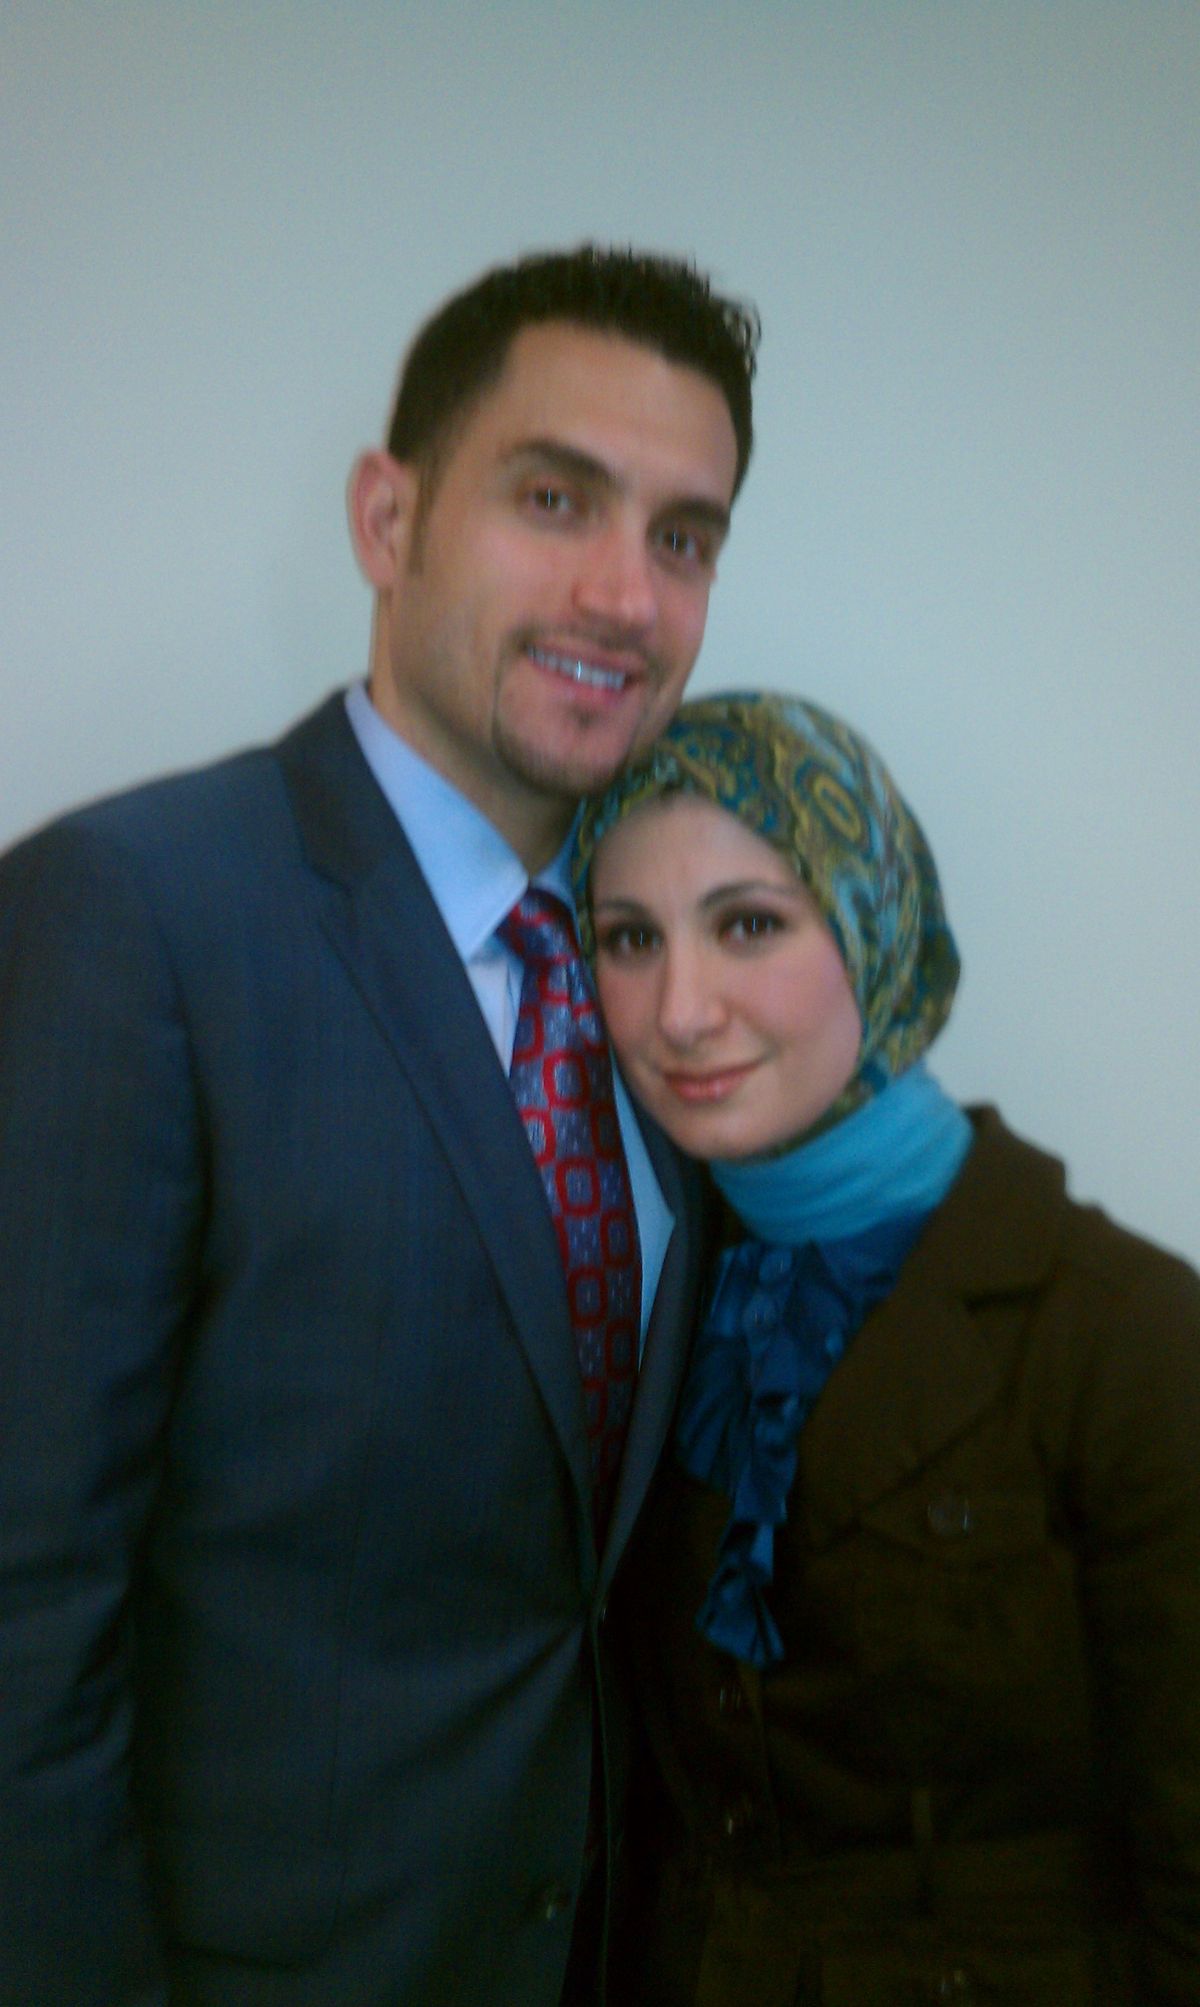 Ramy Kurdi, 33, and his wife, Sarah Hekmati, 31, of Lathrup Village, Mich., are shown at the Michigan office of the Council on American-Islamic Relations in Southfield, Mich., on Tuesday, Sept. 25, 2012, where they and officials of the Muslim advocacy group pleaded for Iranian officials to release Hekmati�s bro9ther, Amir Hekmati. The Arizona-born ex-Marine was arrested on spying charges in August 2011 while visiting is grandmothers in Iran. He was convicted and sentenced to death, but the sentence was overturned. He remains in prison, and no new trial date has been set. (David Goodman / Associated Press)